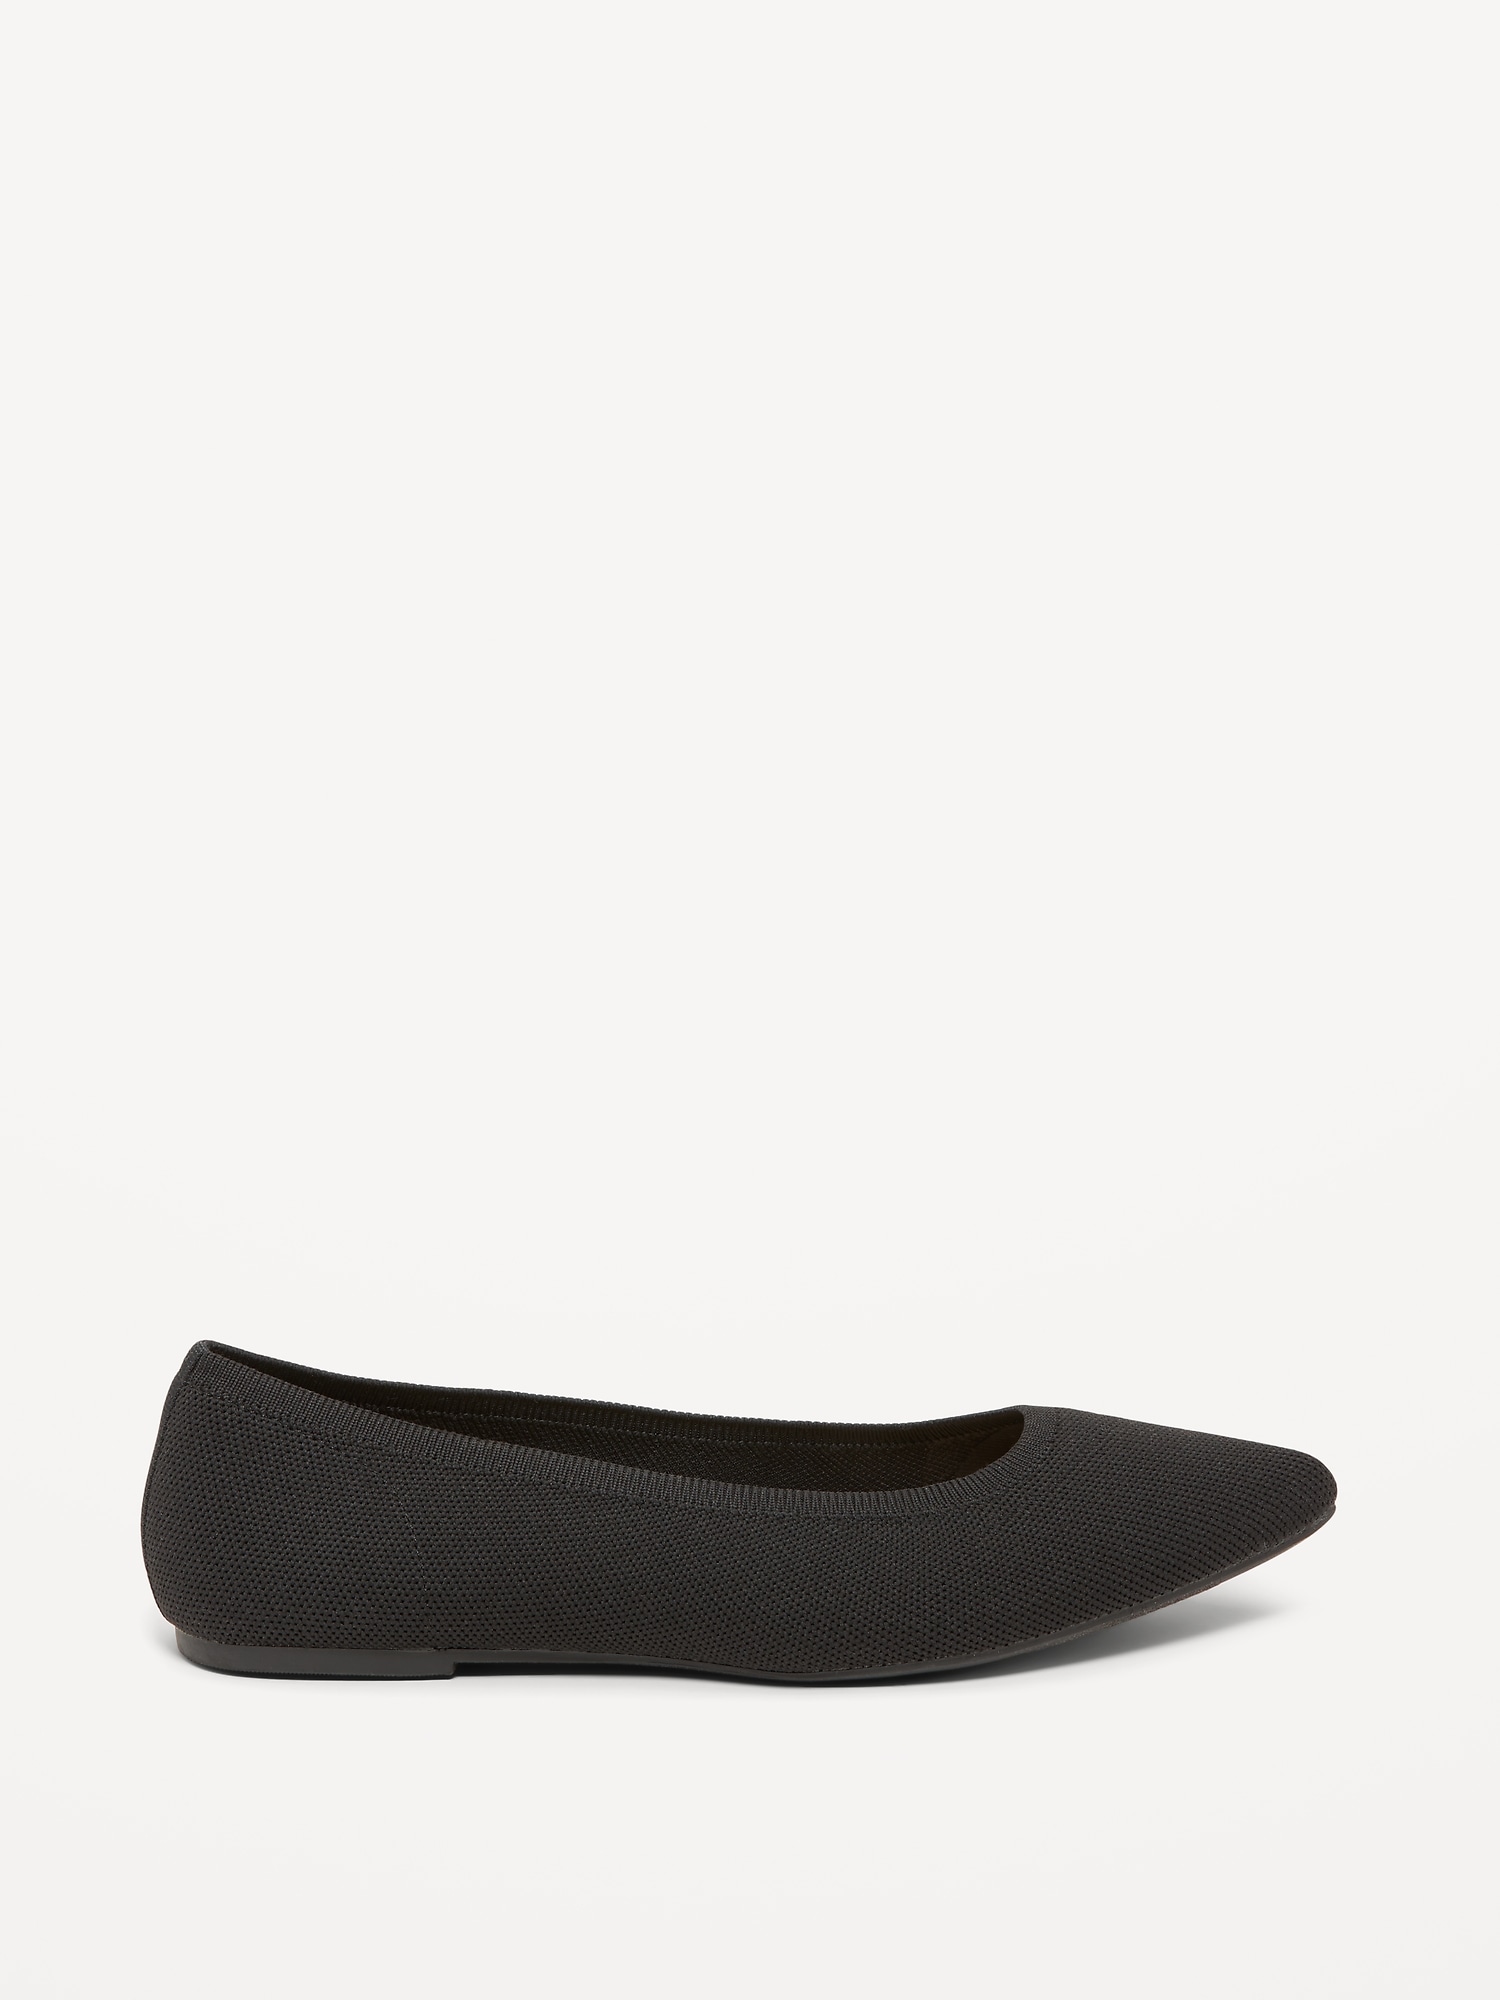 Soft-Knit Pointed-Toe Ballet Flats | Old Navy